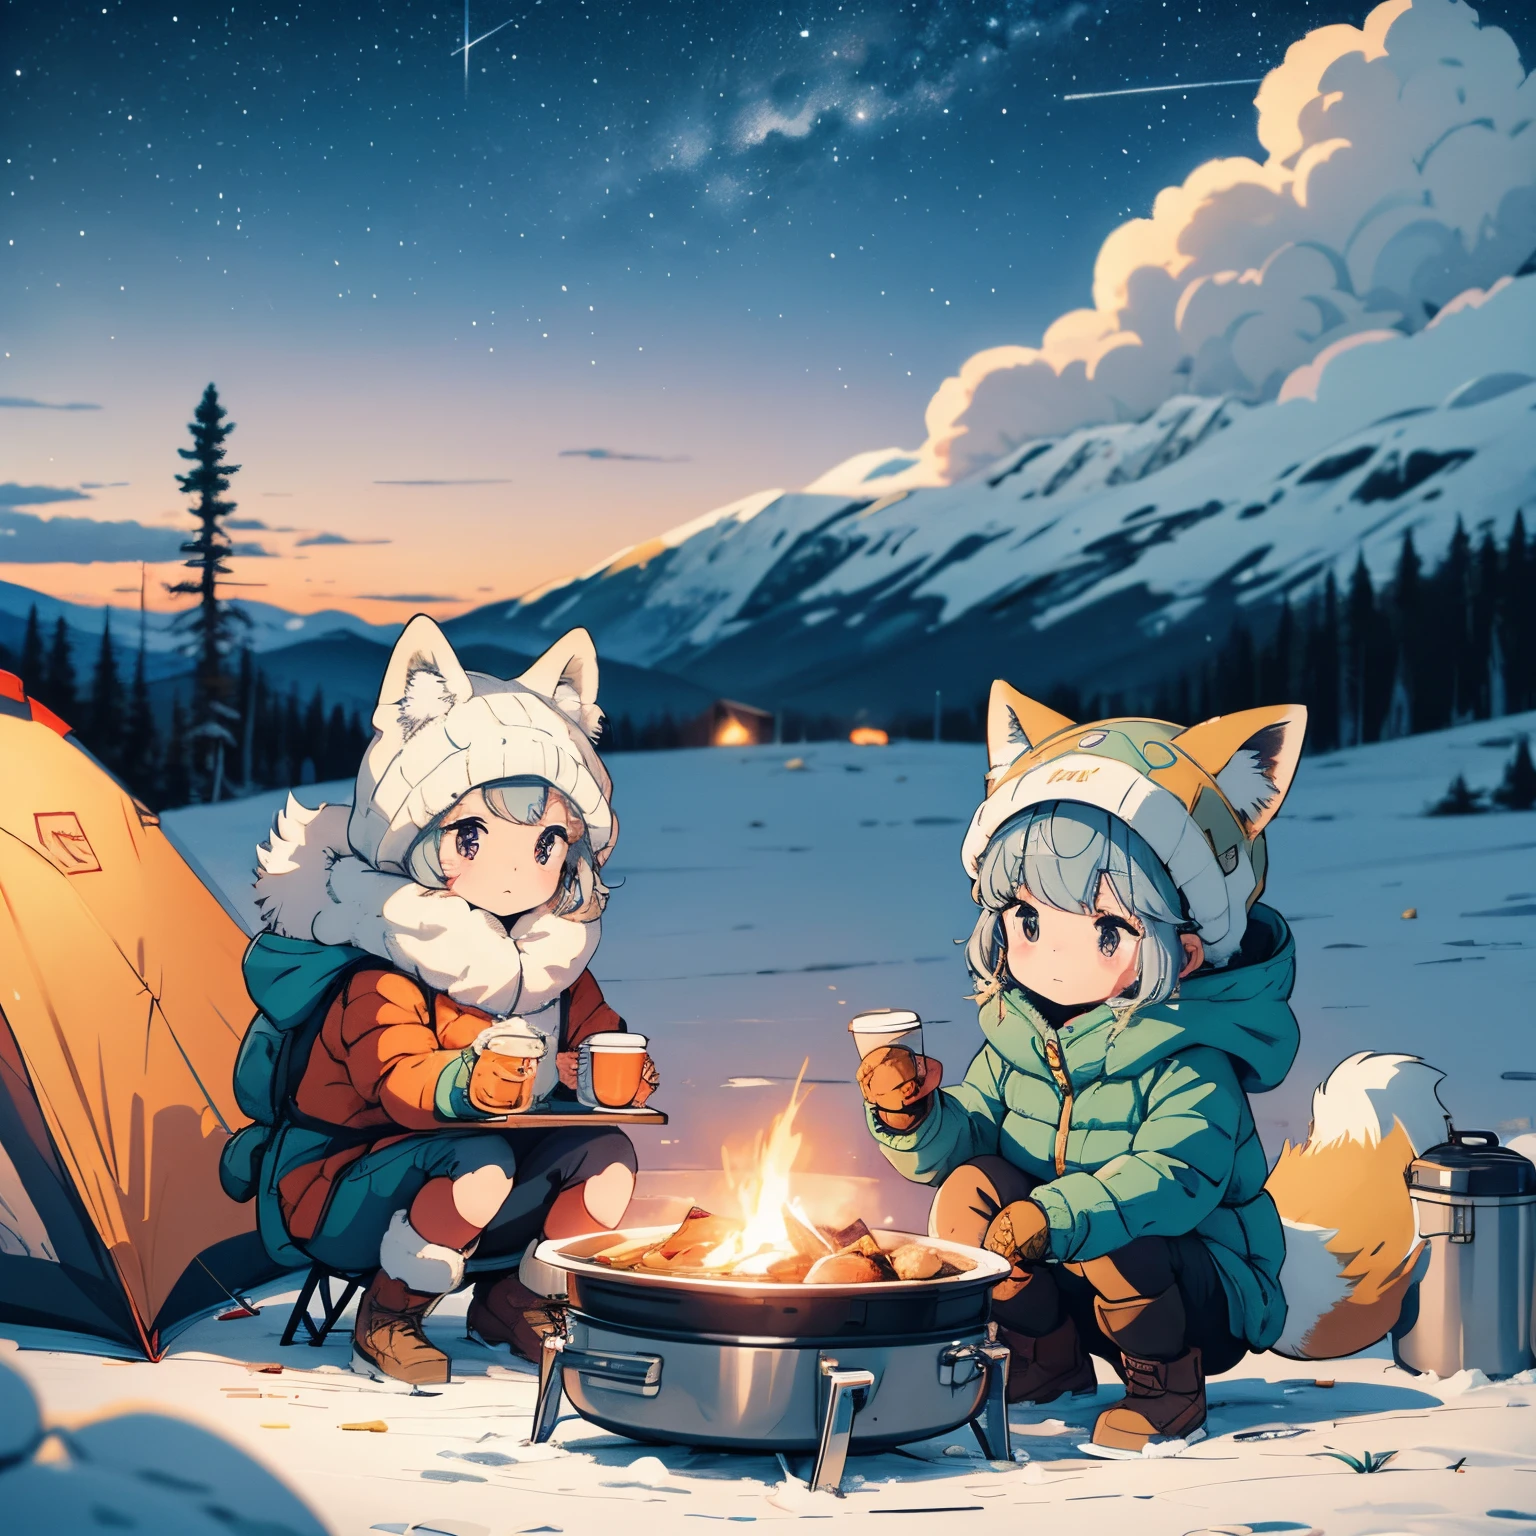 Wide illustration in a simple and muted color palette, emphasizing the chibi fox girl, inspired by 'Yuru Camp△', as she sits among an extensive collection of camping equipment, from tents to advanced cooking gear, with a vintage motorcycle adding a touch of nostalgia, all under a gently blurred starlit winter sky.